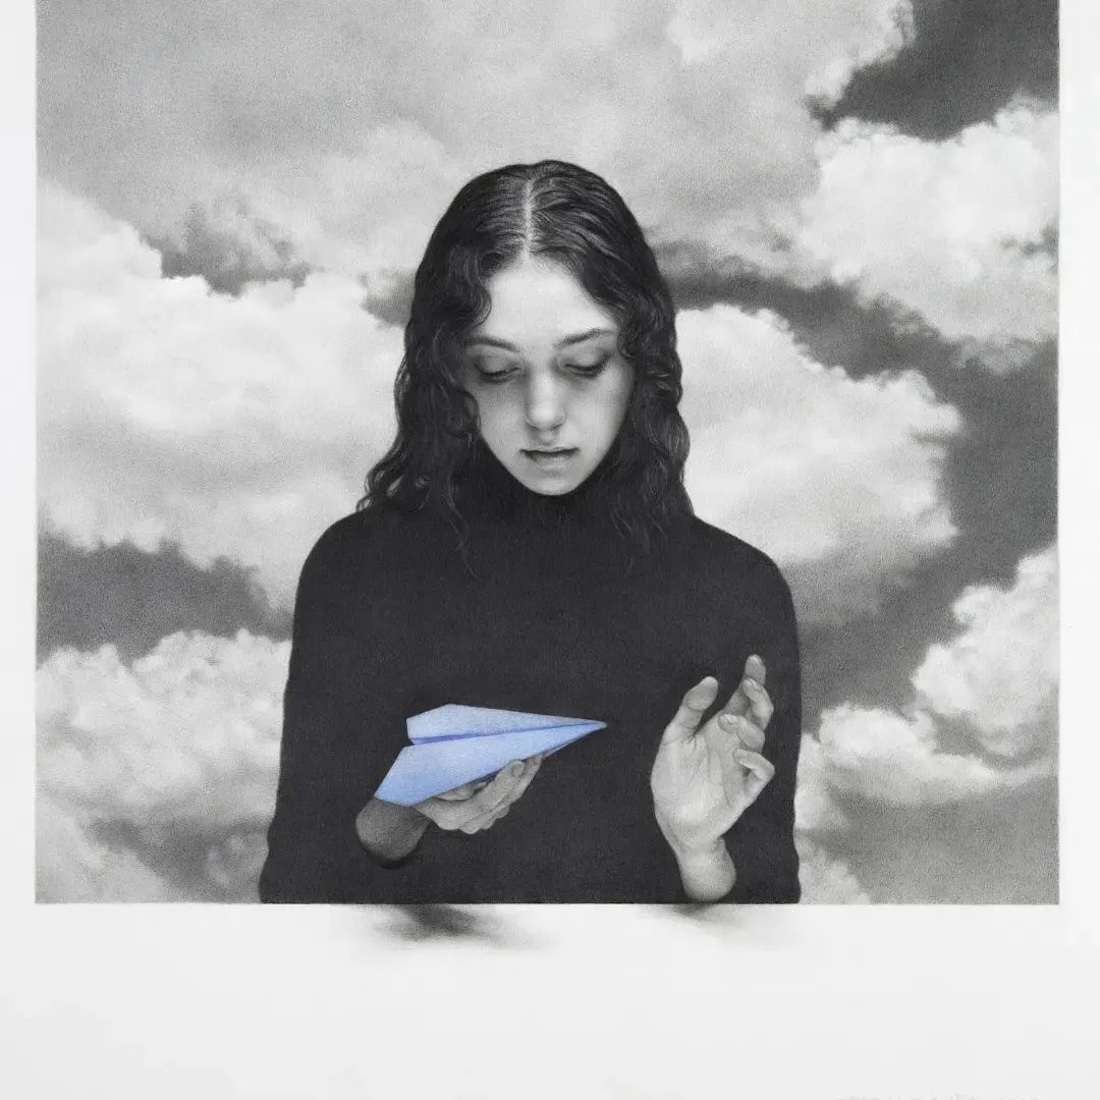 A hyper-realistic, mostly black and white illustration of a young woman sitting with clouds in the background, holding a light blue paper airplane.